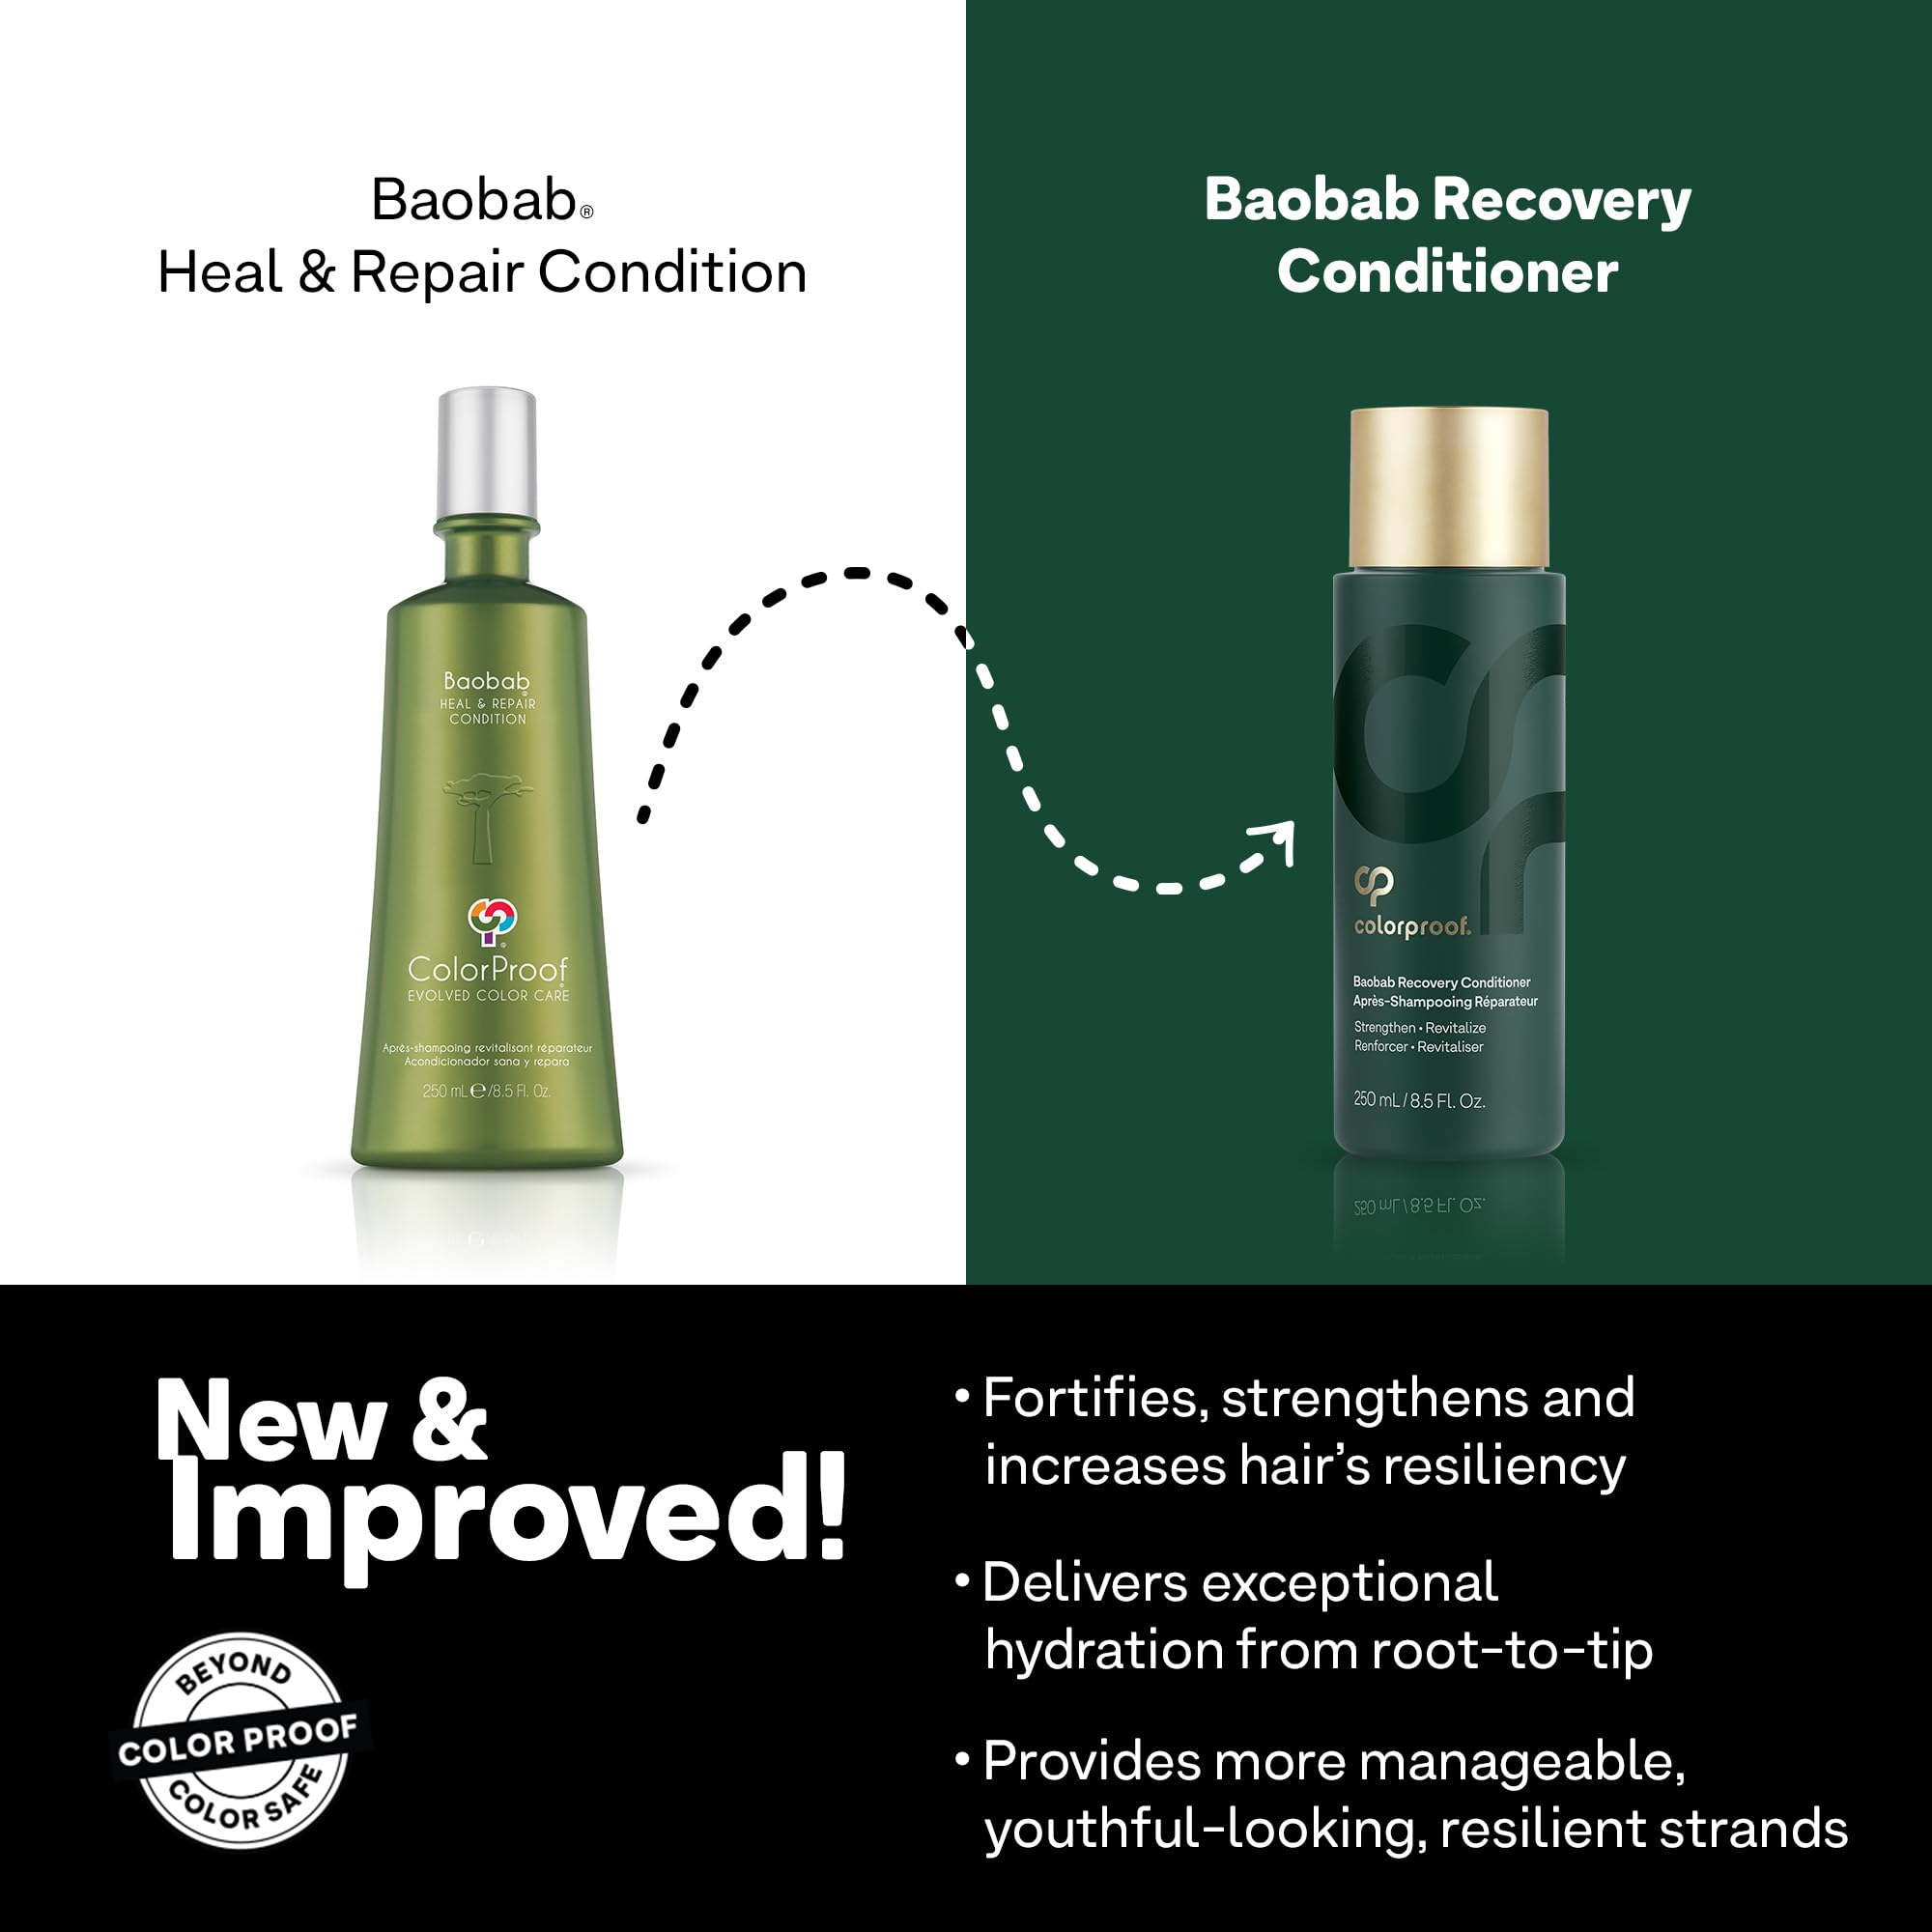 Colorproof Baobab Recovery Conditioner, 8.5oz - For Damaged Color-Treated Hair, Strengthens & Repairs, Sulfate-Free, Vegan